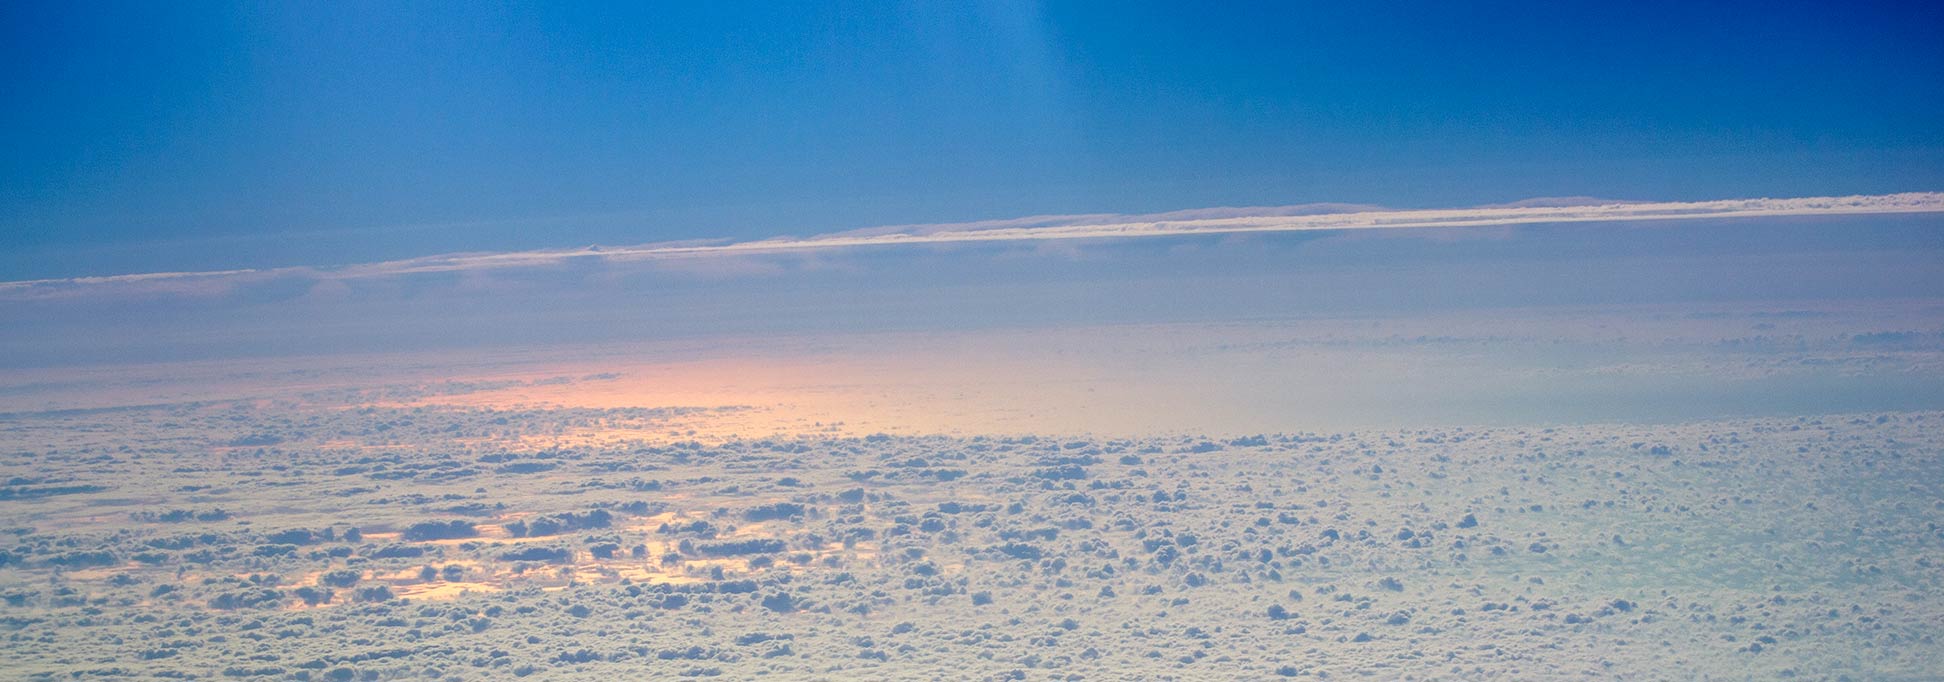 Over the clouds - 